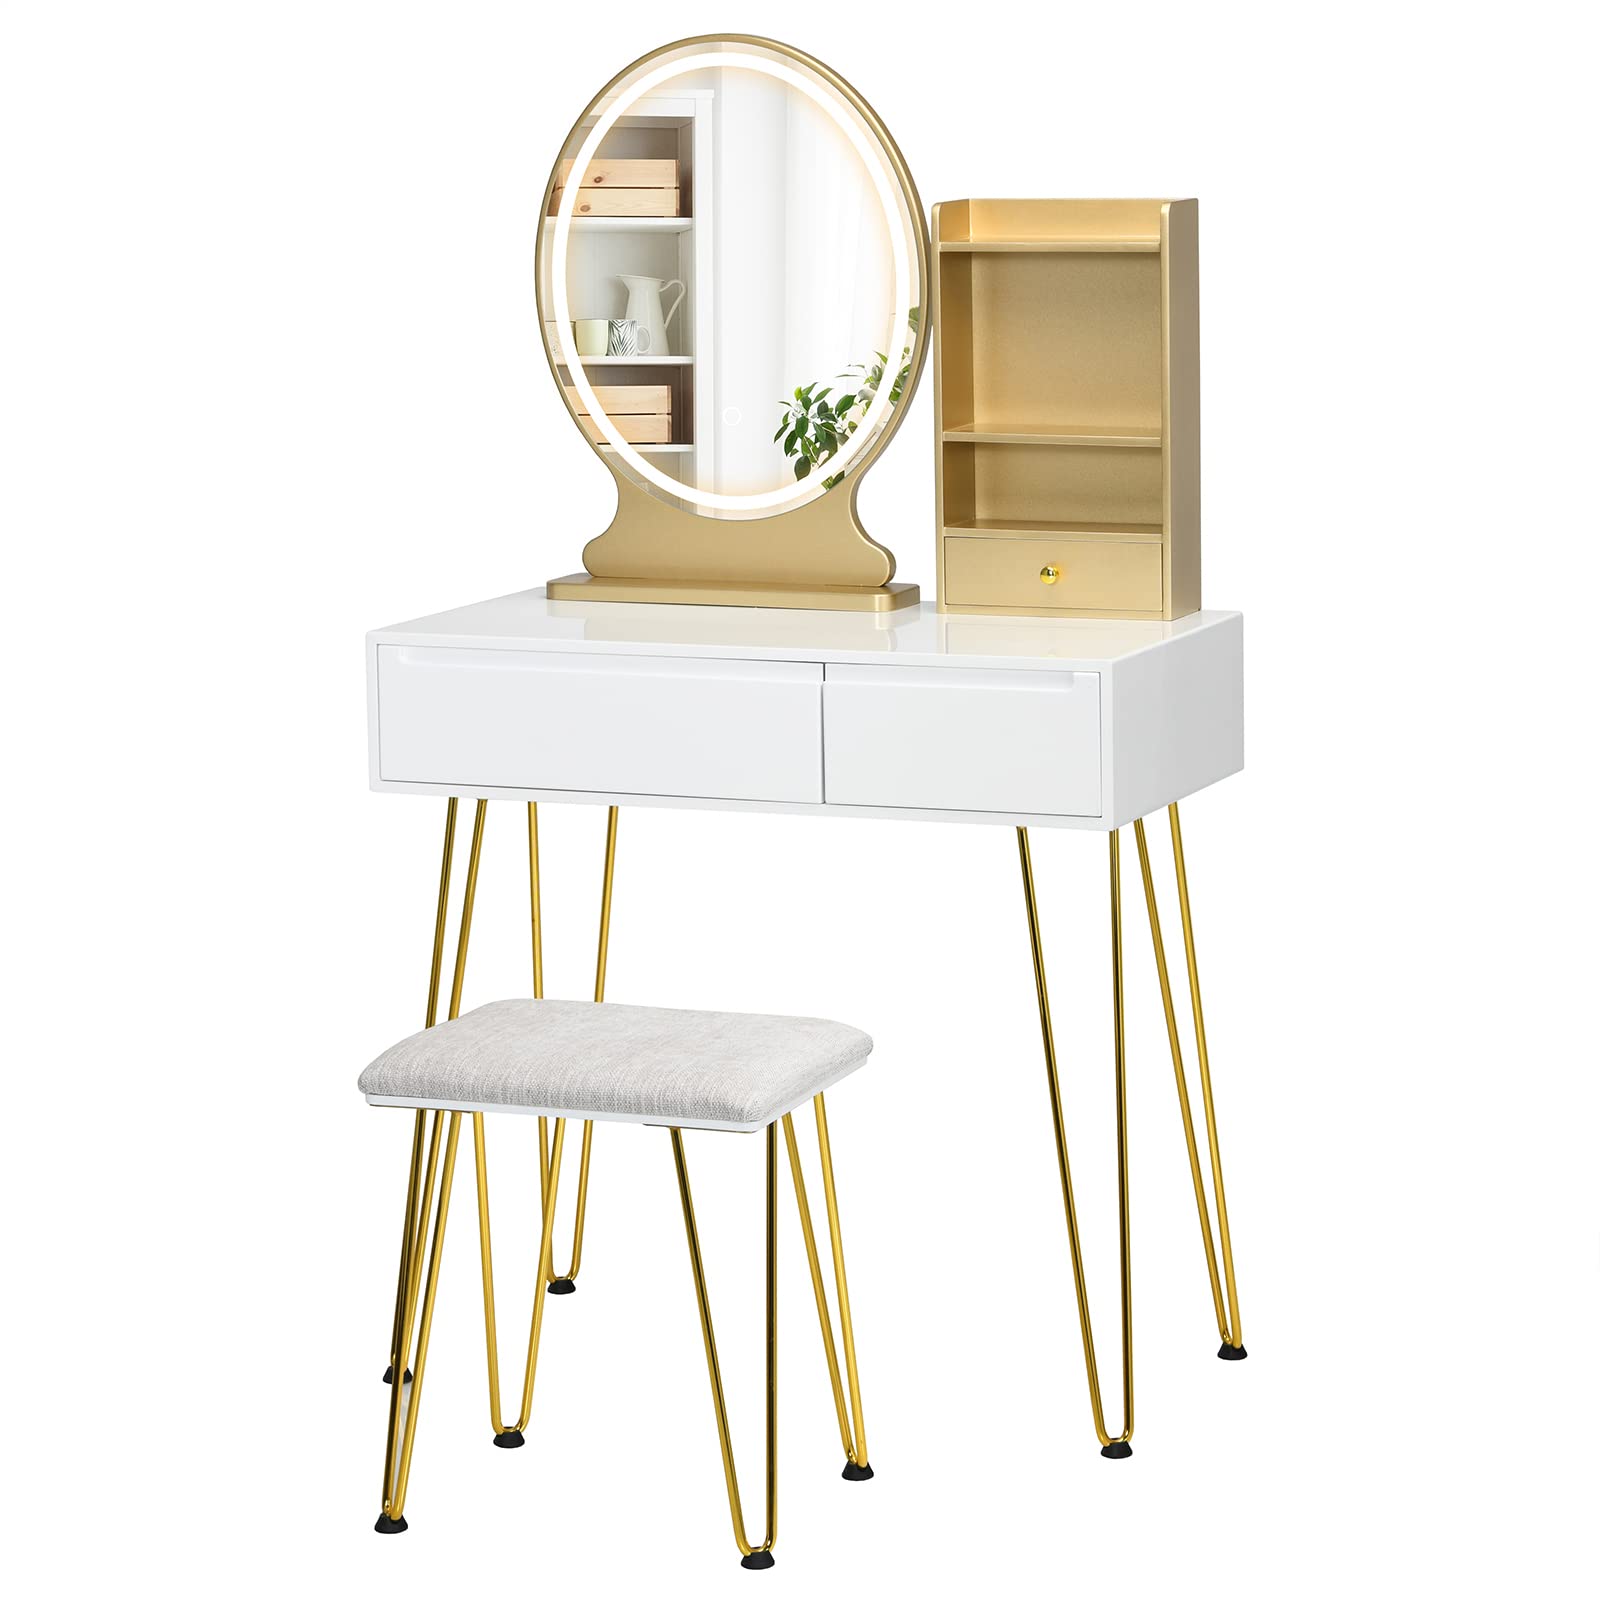 CHARMAID Vanity Set with Lighted Mirror, 3 Drawers and 3 Tiers Storage Shelves